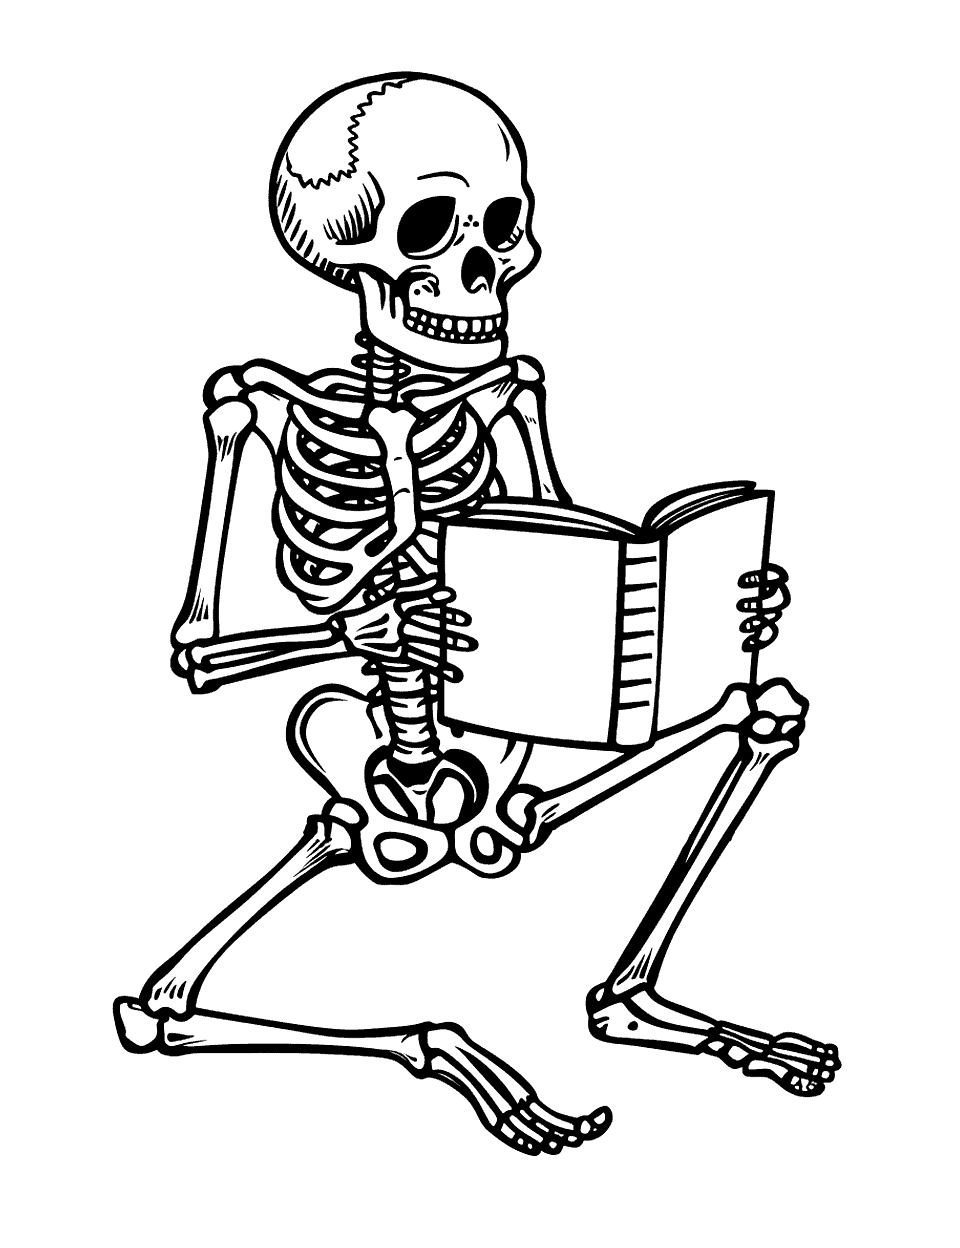 Skeleton Reading a Book Coloring Page - A skeleton engrossed in reading a thick book.